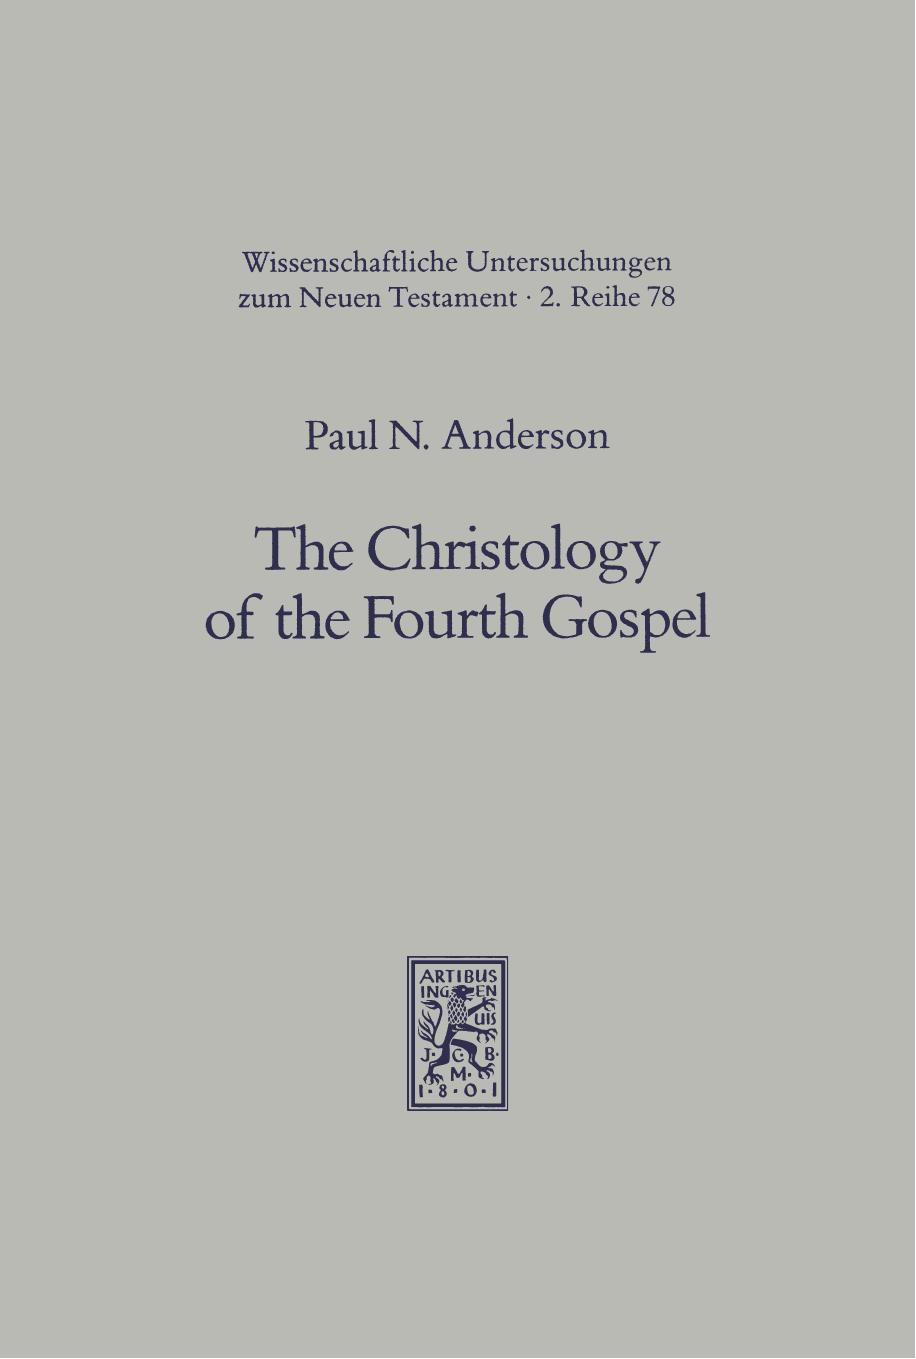 The Christology of the Fourth Gospel: Its Unity and Disunity in the Light of John 6 by Paul N Anderson